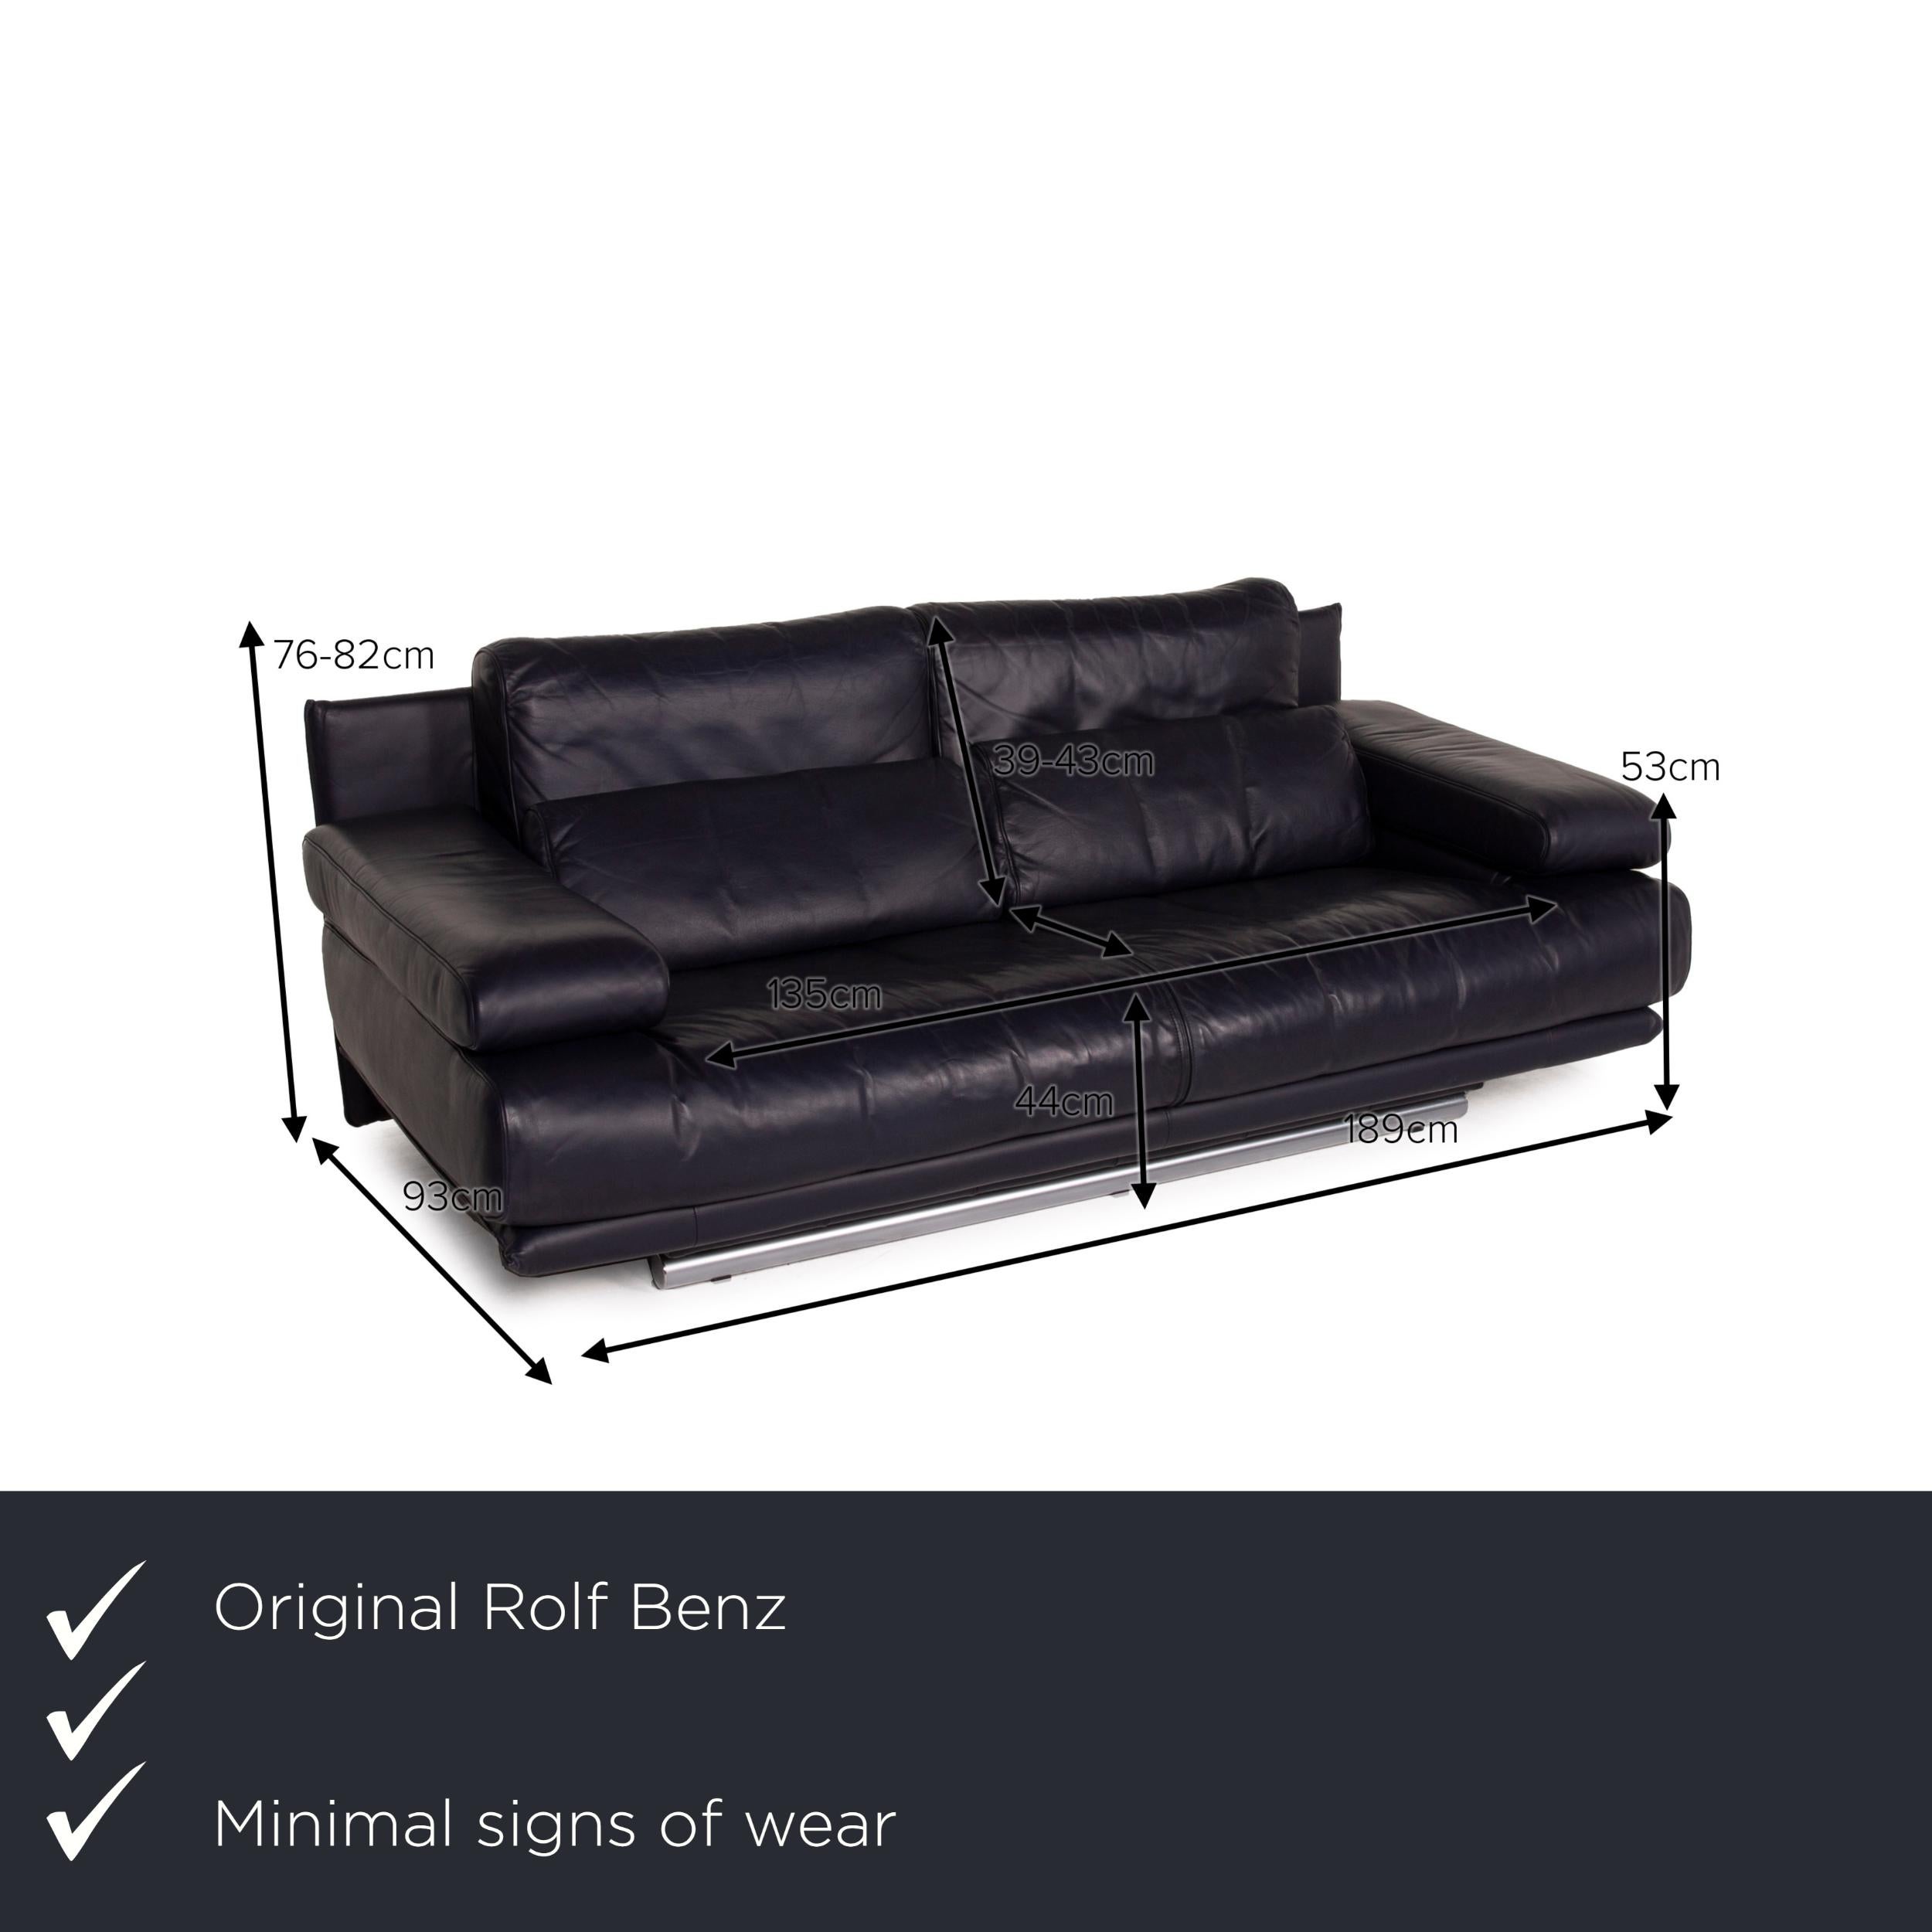 We present to you a Rolf Benz 6500 leather sofa blue two-seater dark blue.

Product measurements in centimeters:

Depth 93
Width 189
Height 76
Seat height 42
Rest height 53
Seat depth 44
Seat width 135
Back height 43.
 

  